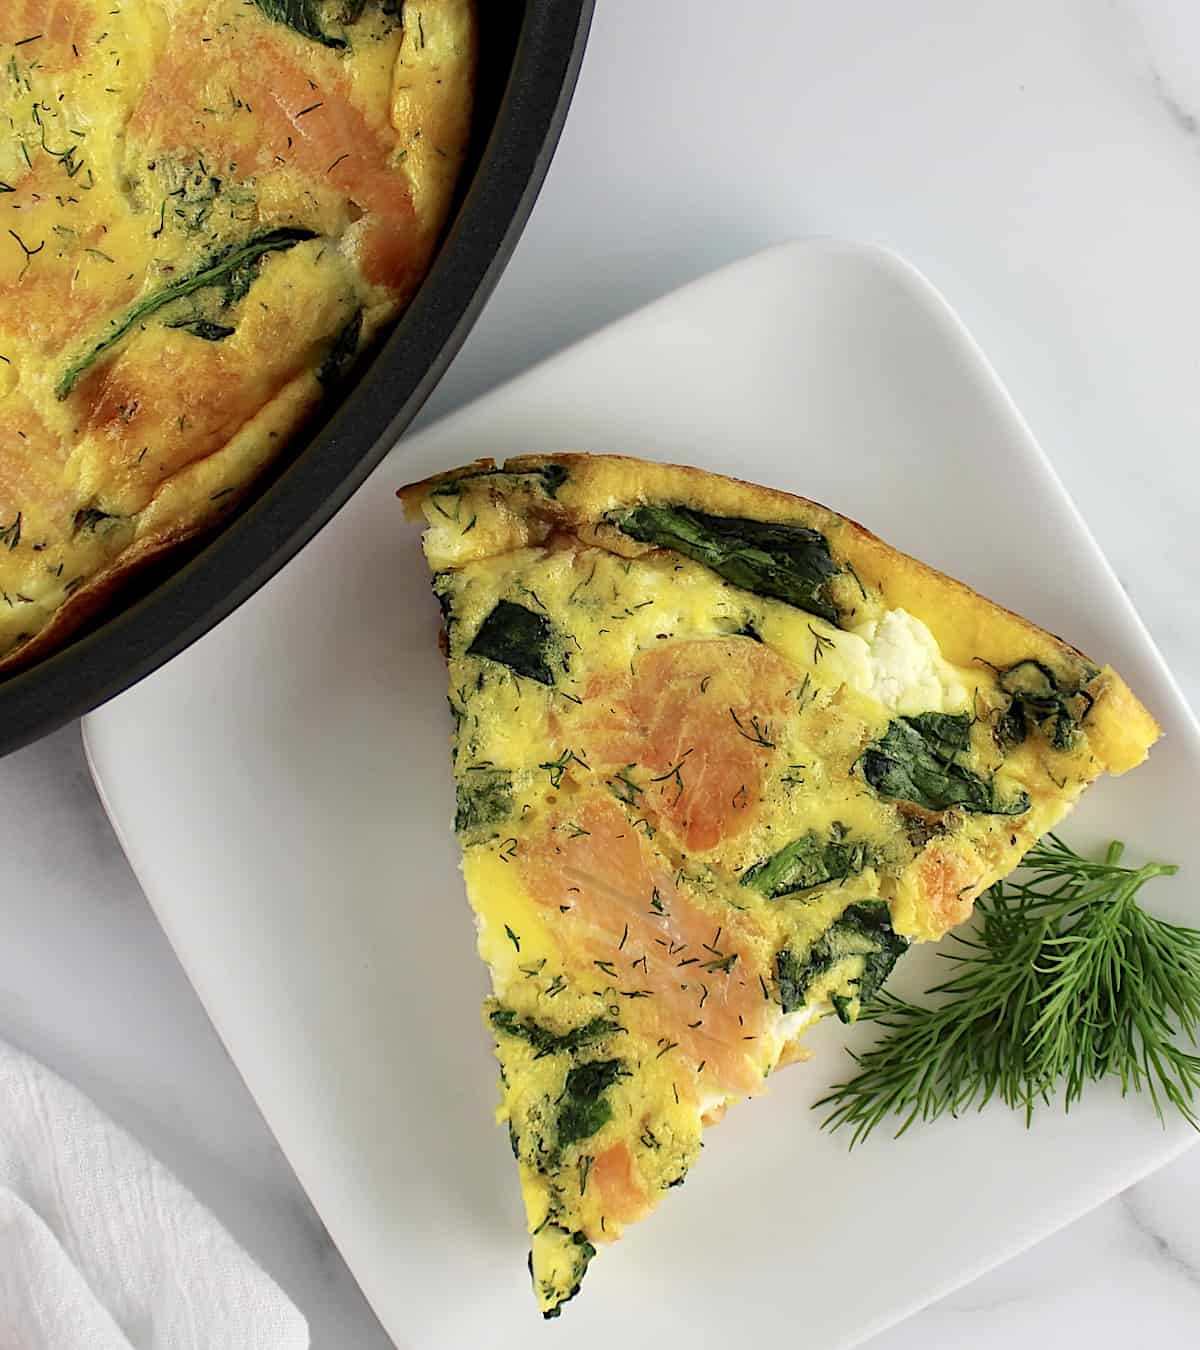 Smoked Salmon Frittata slice on plate with sprig of dill and skillet on side